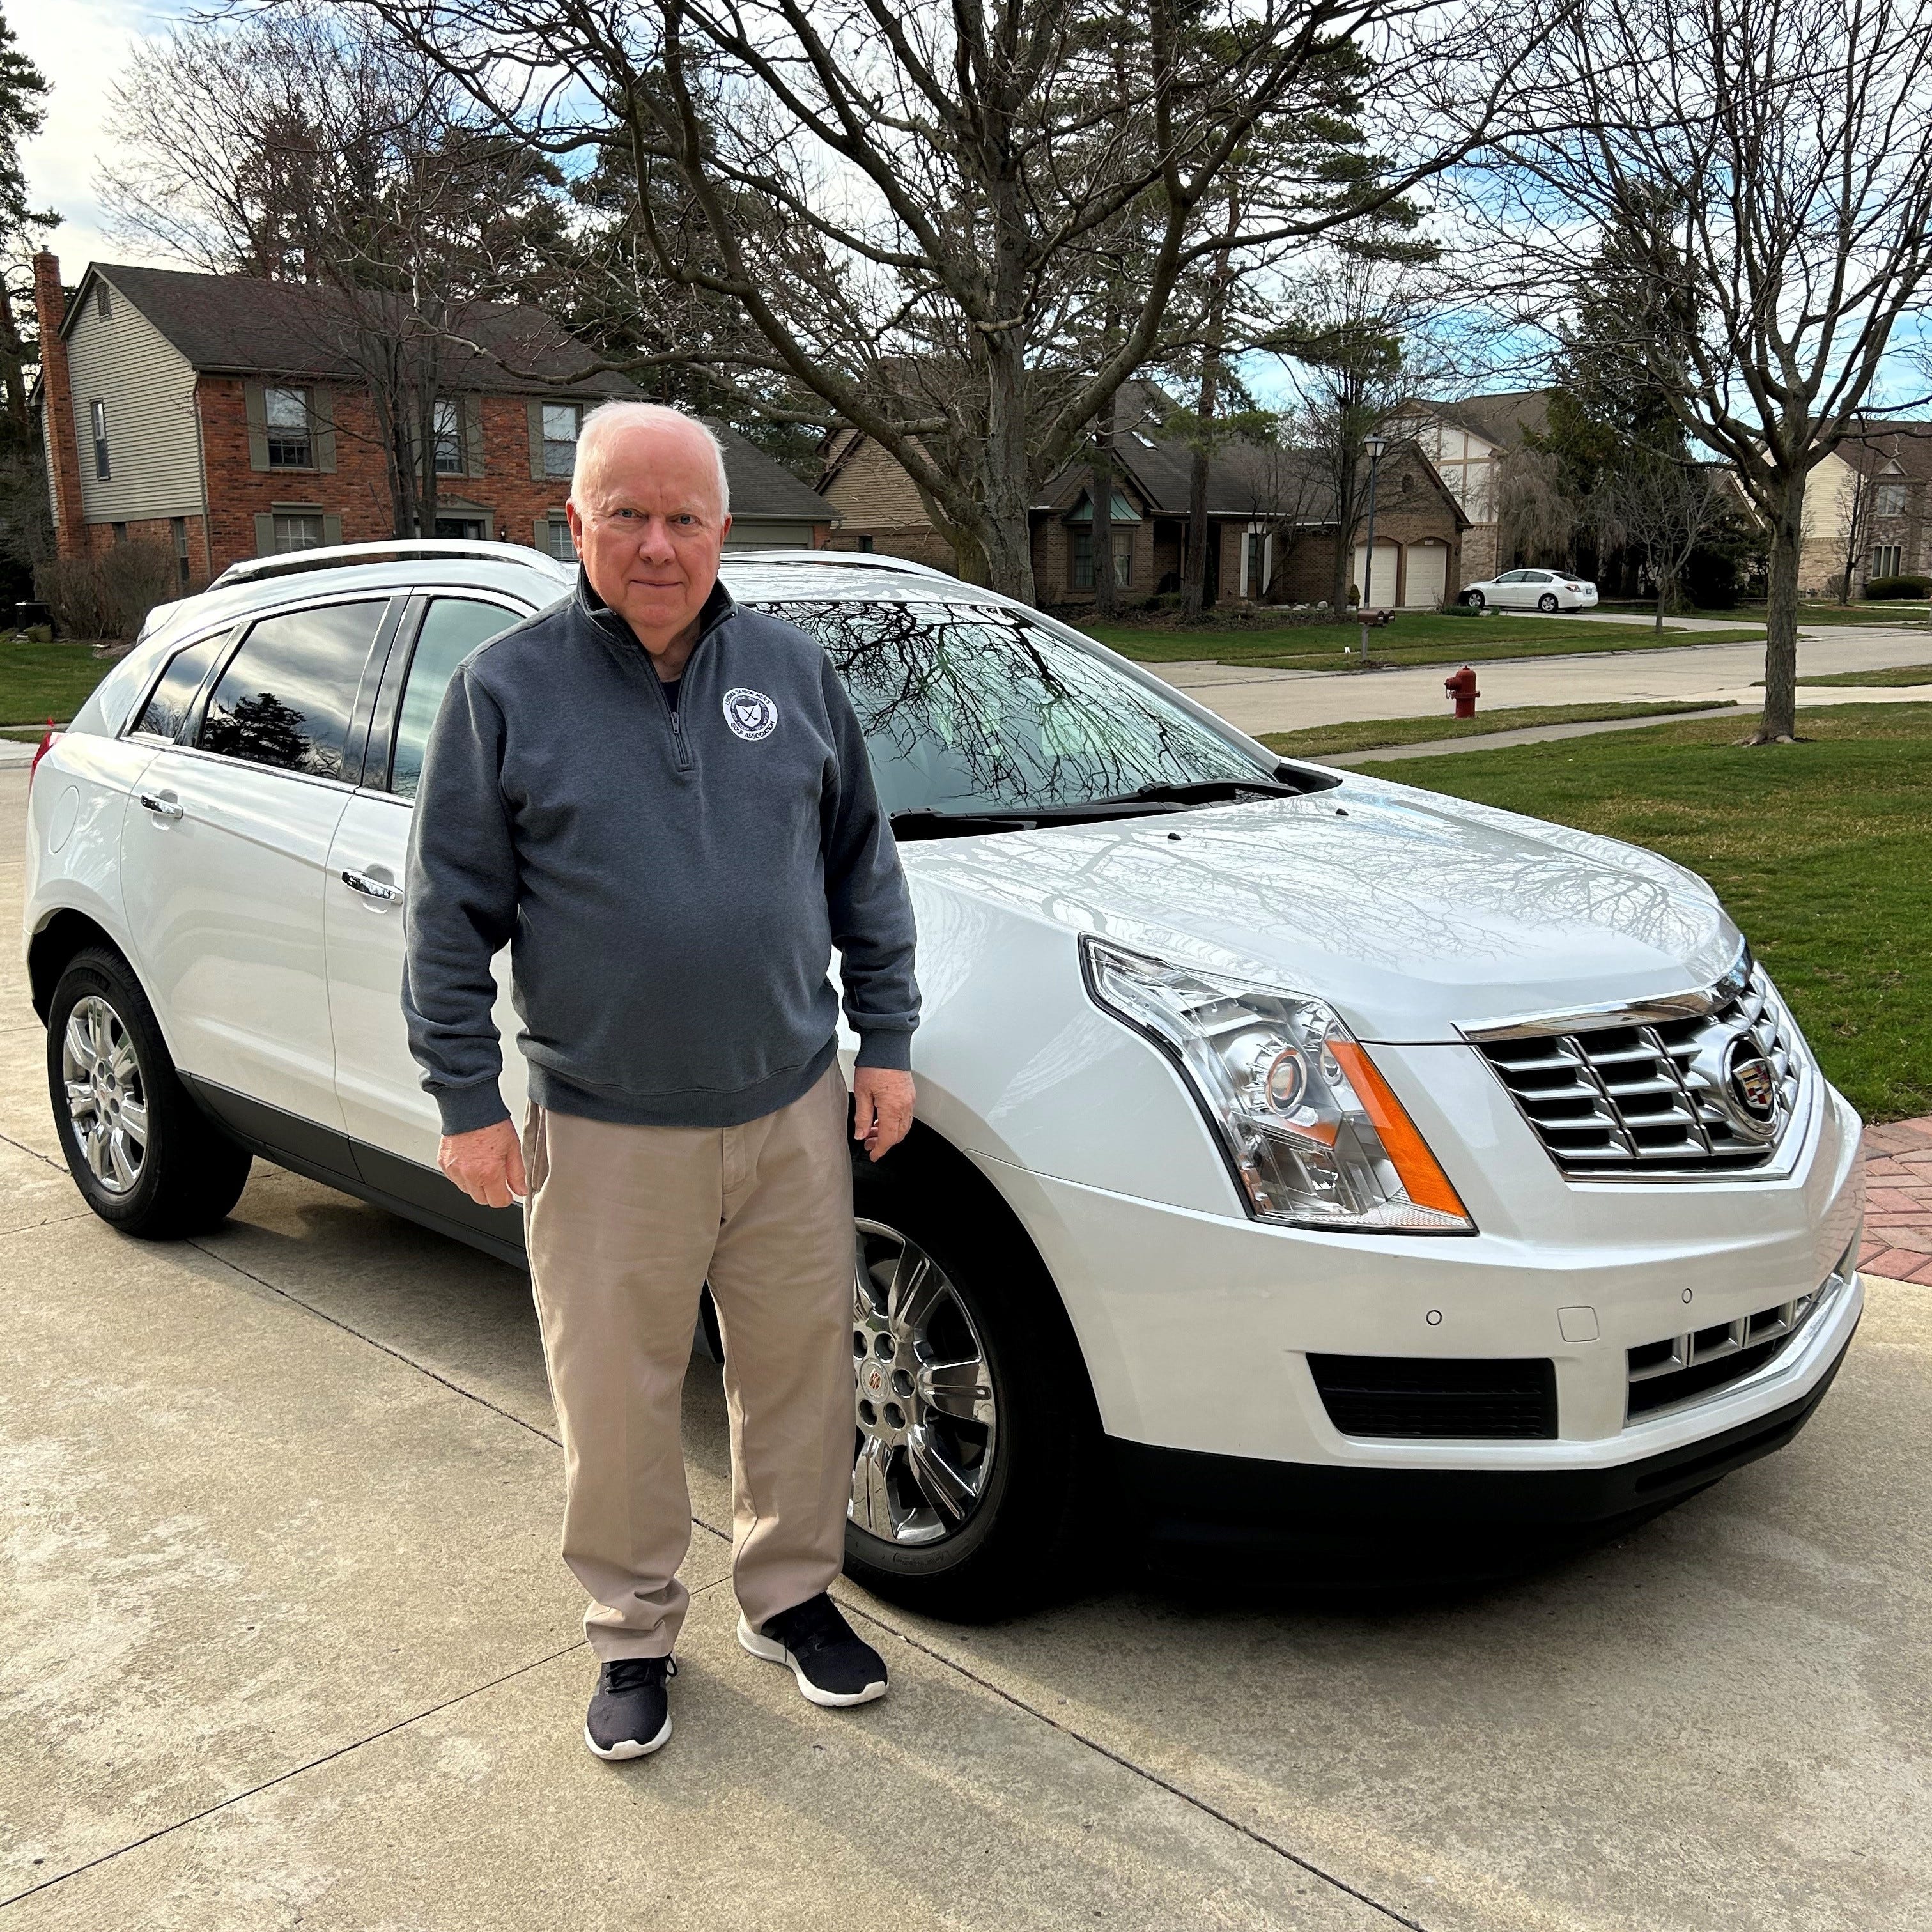 Will Lindley of Livonia was considering trading in his wife's 2016 Cadillac SRX (pictured here) for an electric vehicle, but he said it won't be a General Motors EV if it does not have Apple CarPlay.